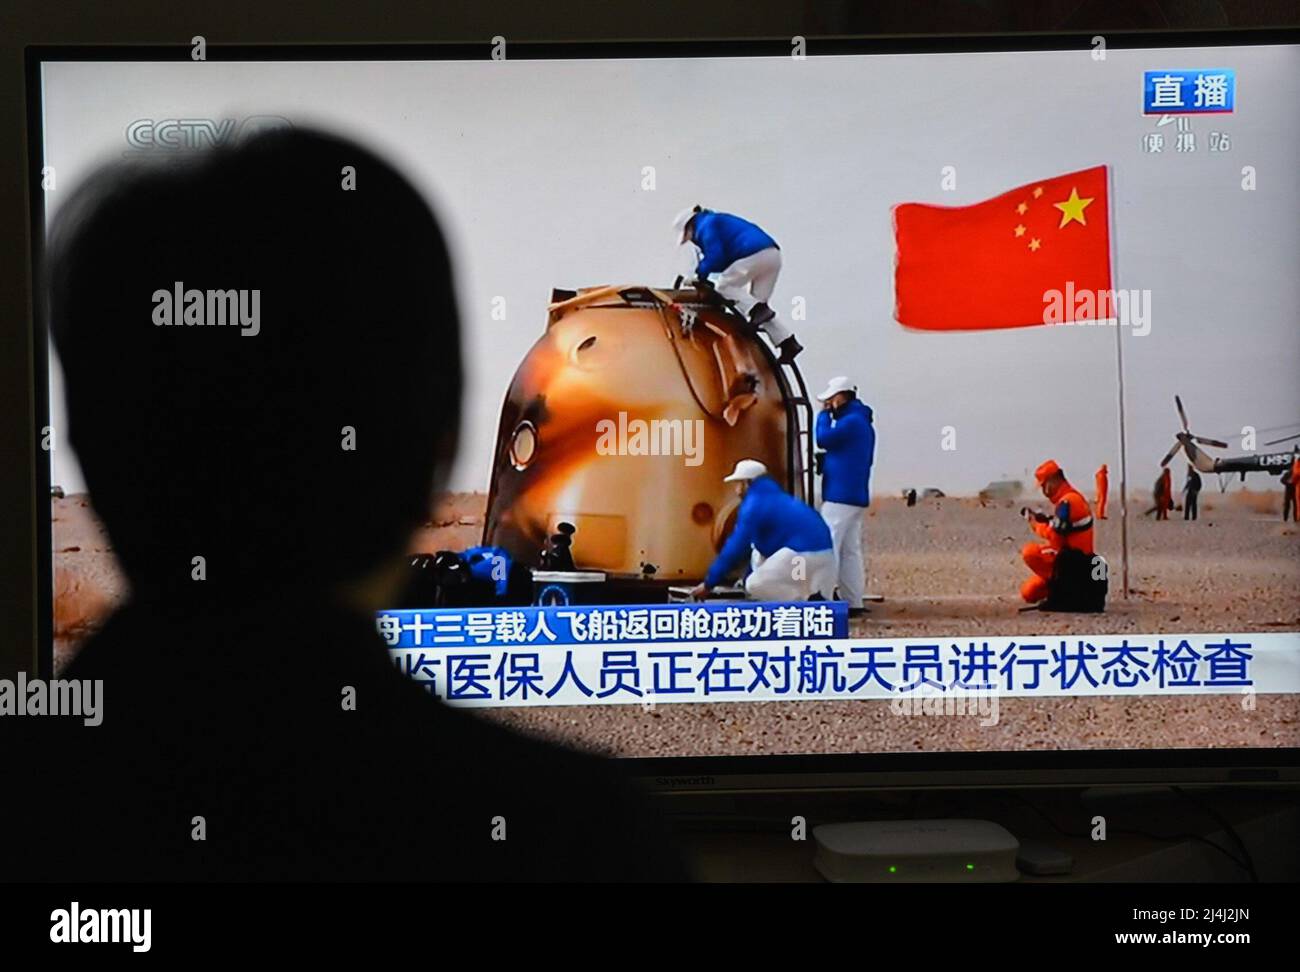 A woman watches a live TV broadcast of the successful landing of the Shenzhou XIII re-entry module. After orbiting Earth for six months, the three crew members of China's Shenzhou XIII mission departed from the Tiangong space station. They returned to the mother planet on Saturday morning, finishing the nation's longest human-crewed spaceflight. Major General Zhai Zhigang, the mission commander, Senior Colonel Wang Yaping, and Senior Colonel Ye Guangfu breathed fresh air for the first time after the half-year space journey as ground recovery personnel opened the hatch of their re-entry capsule Stock Photo